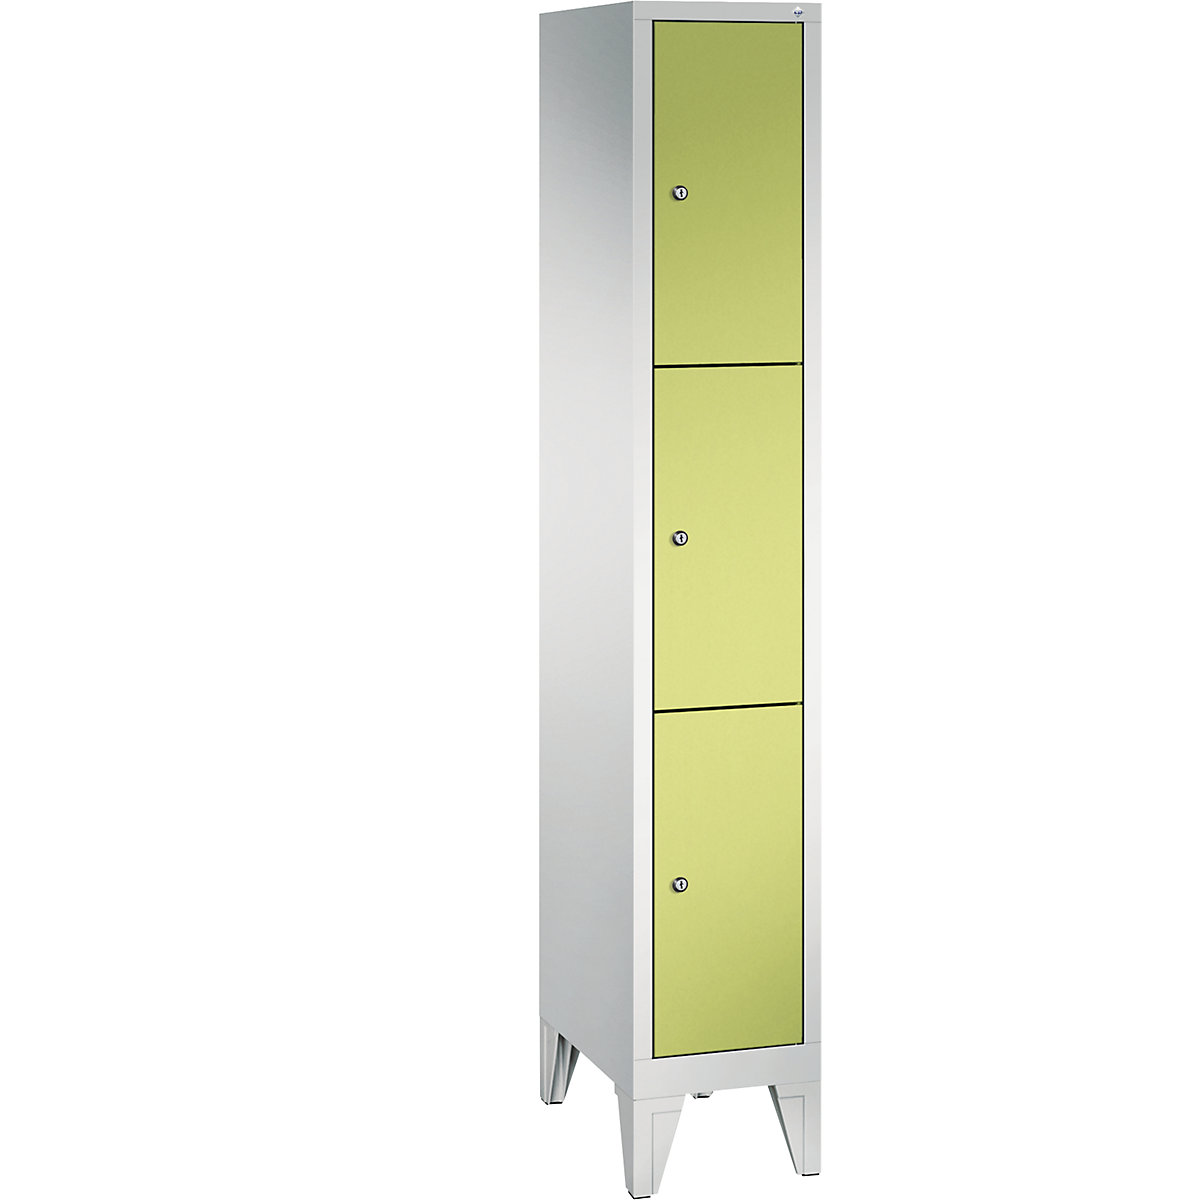 CLASSIC locker unit with feet – C+P, 1 compartment, 3 shelf compartments, compartment width 300 mm, light grey / viridian green-7